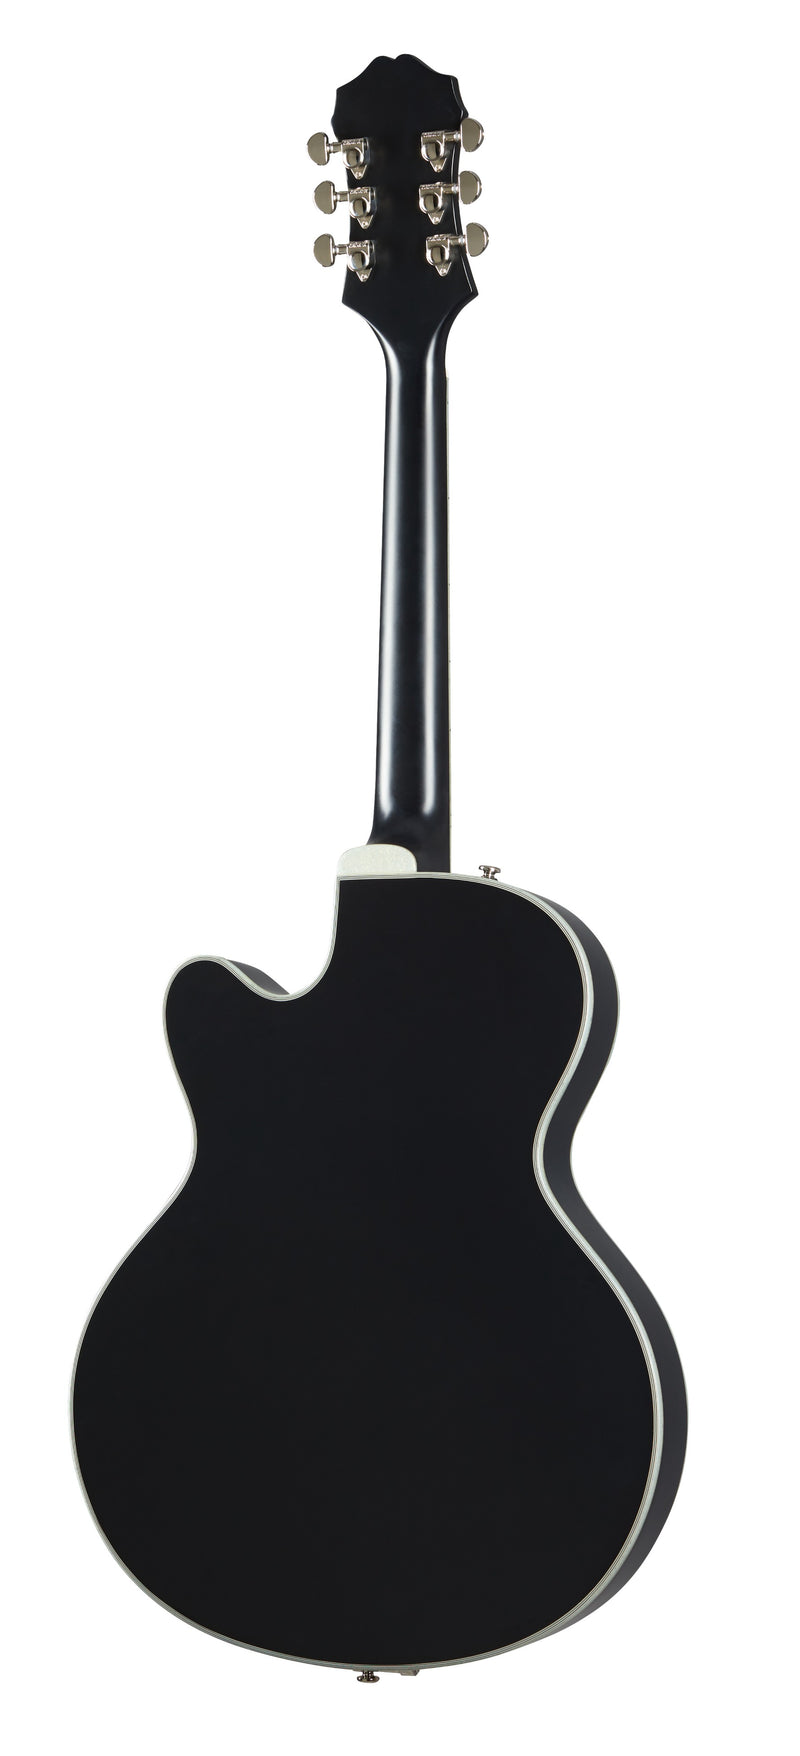 Guitarra Electrica Epiphone Emperor Swingster Black Aged Gloss